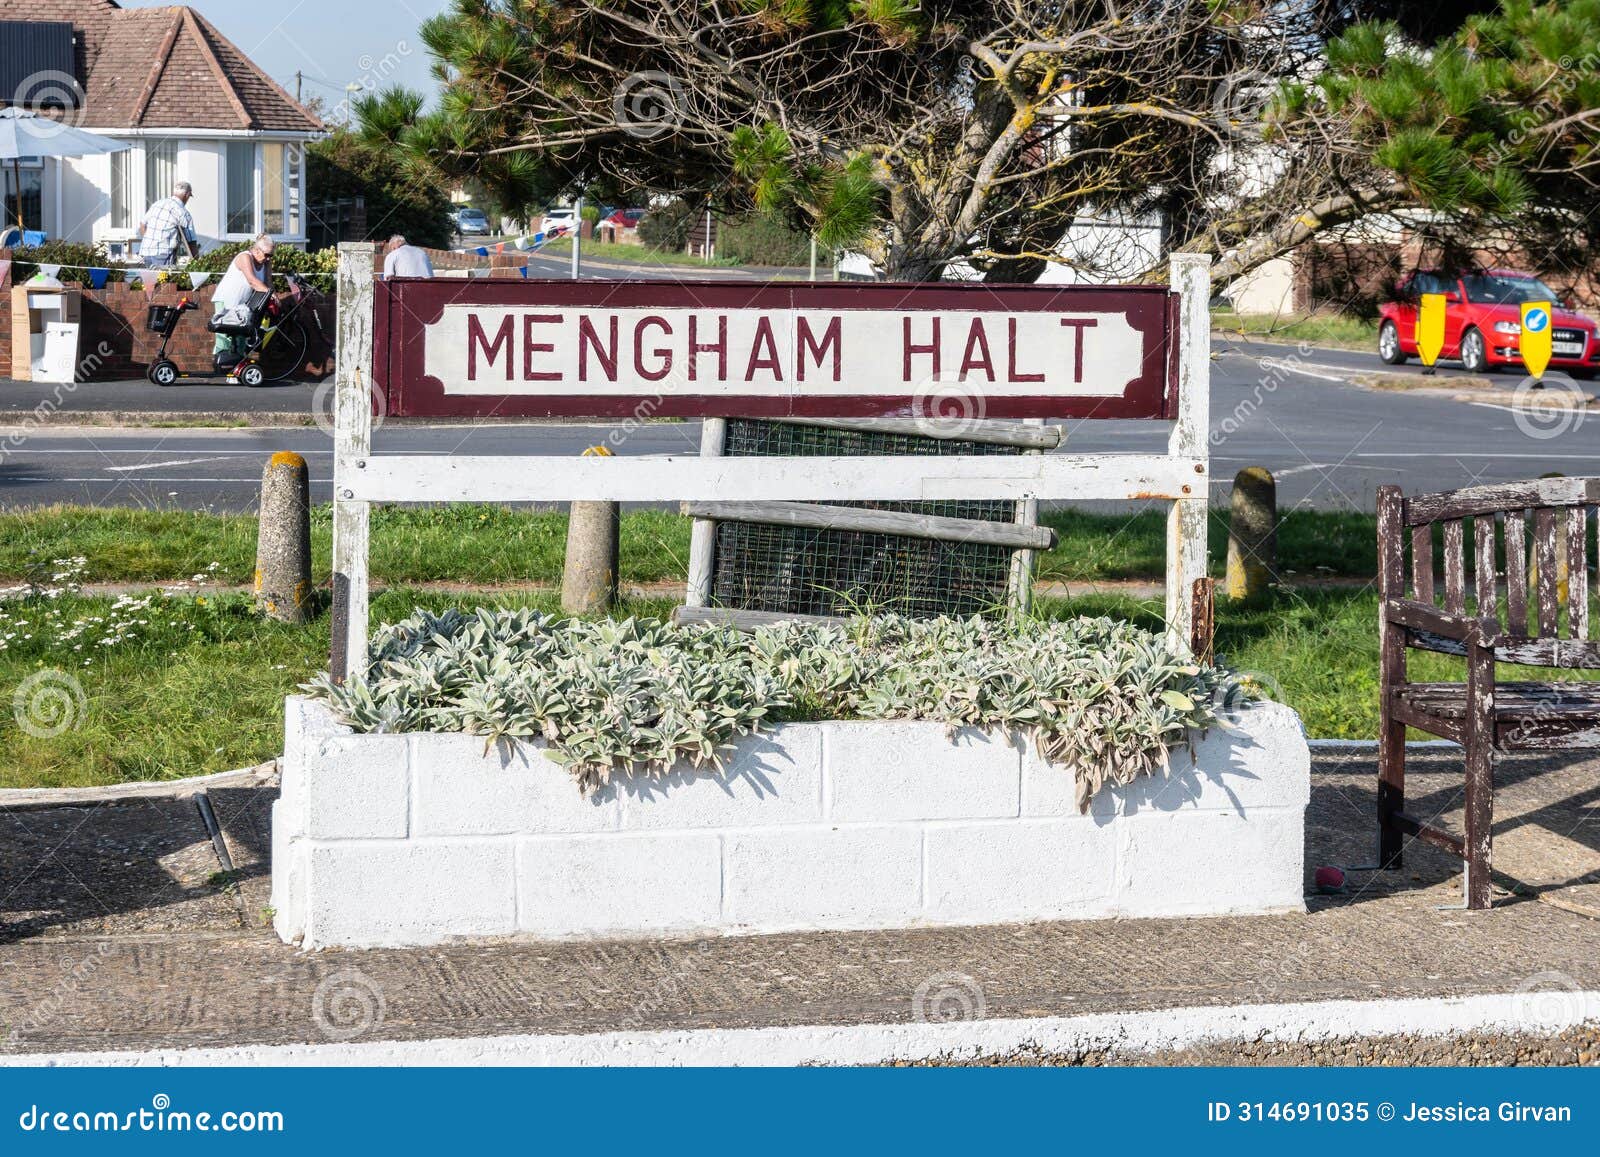 Photograph of the Mengham Halt Sign on the Light-railway Line in ...